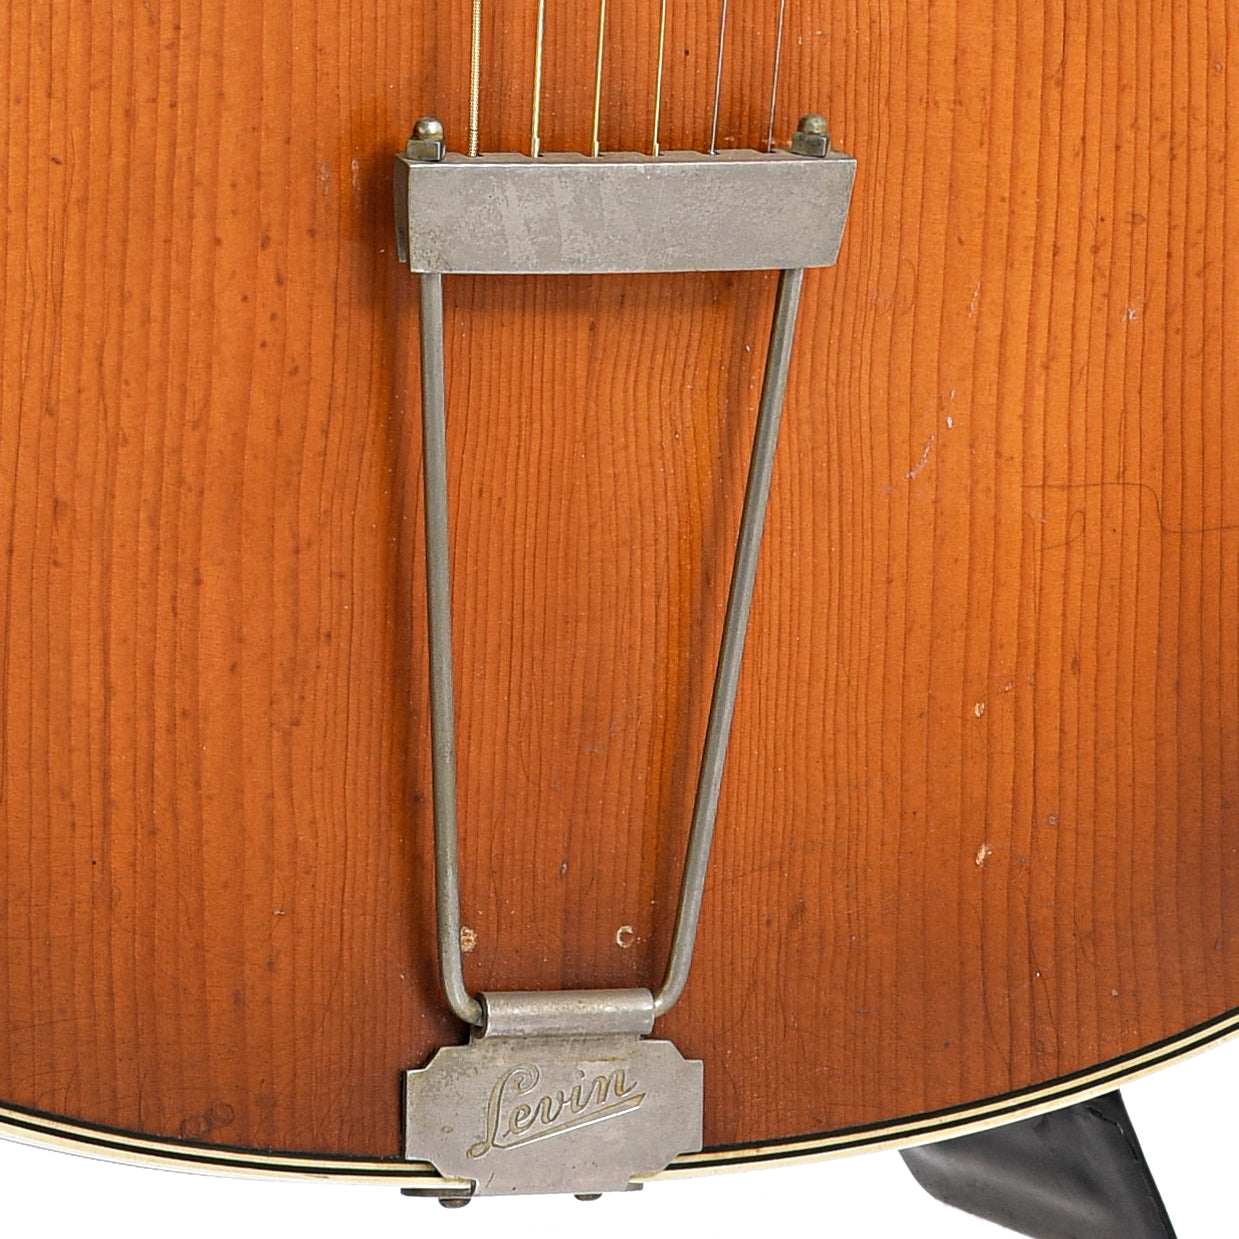 tailpiece of Levin Garanti Archtop Acoustic Guitar (1950)